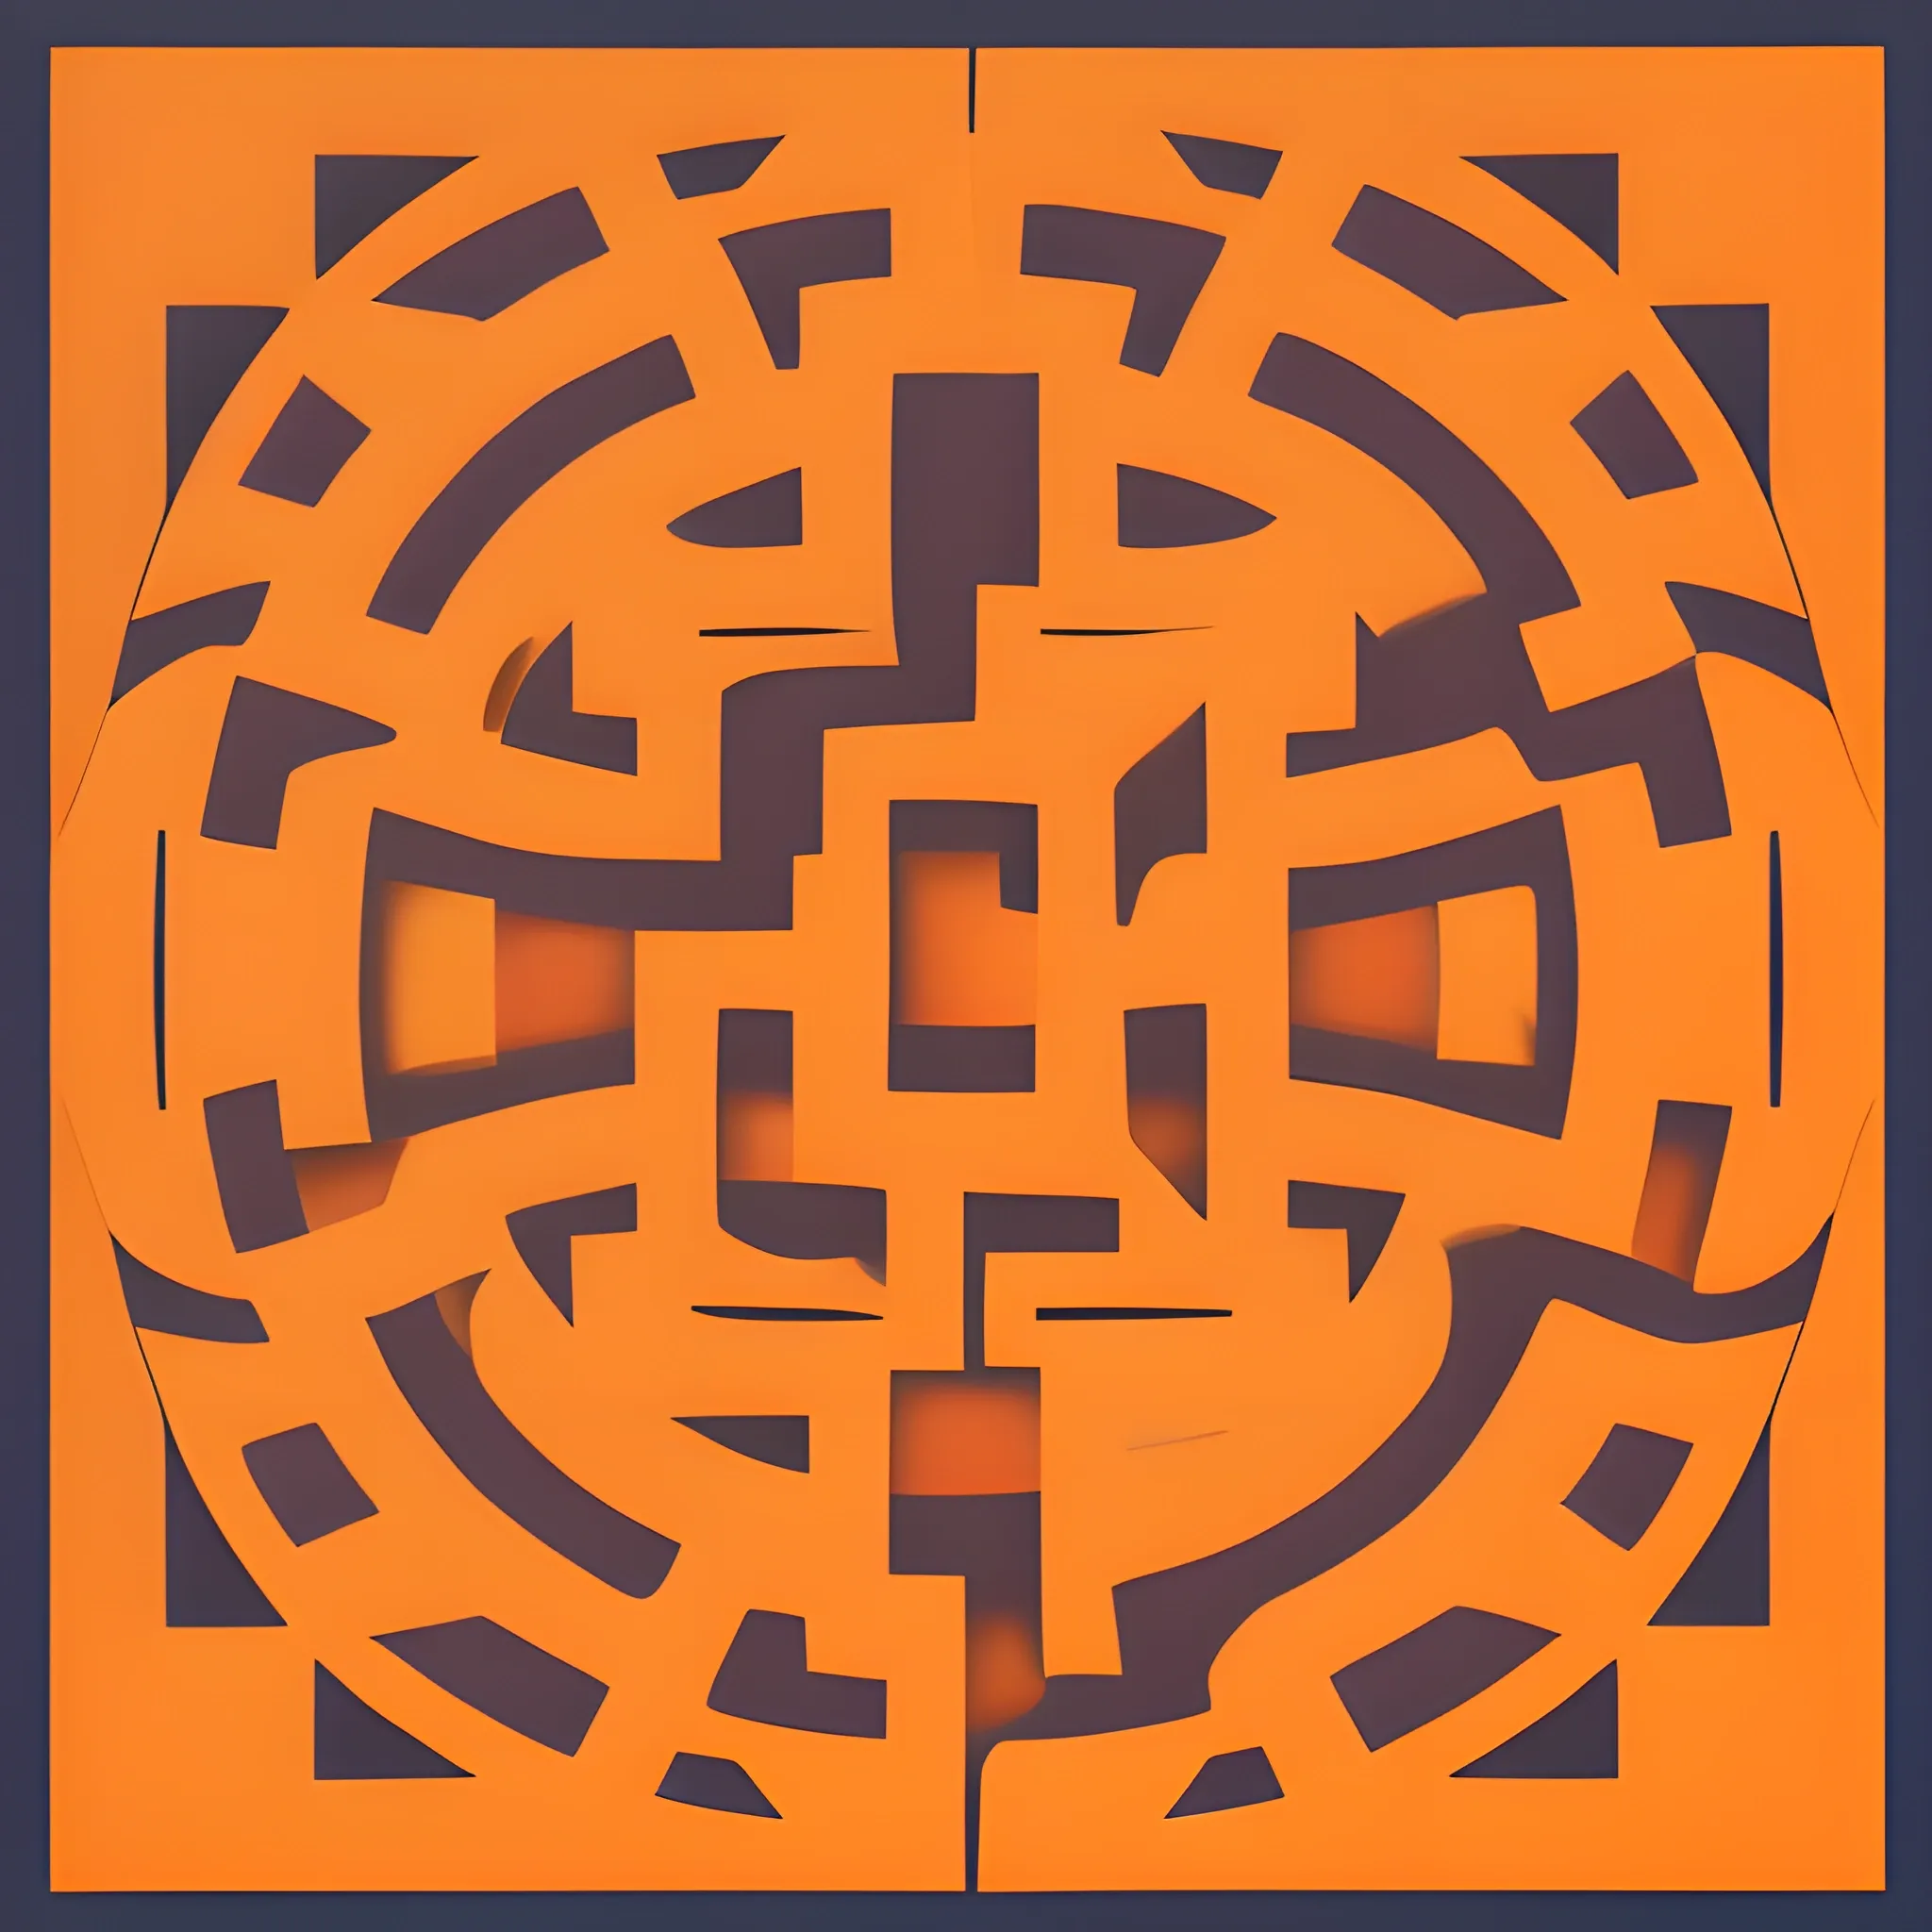 An abstract maze of a square shape with rounded corners hovering over fields of geometric shapes, background in warm orange soft colors